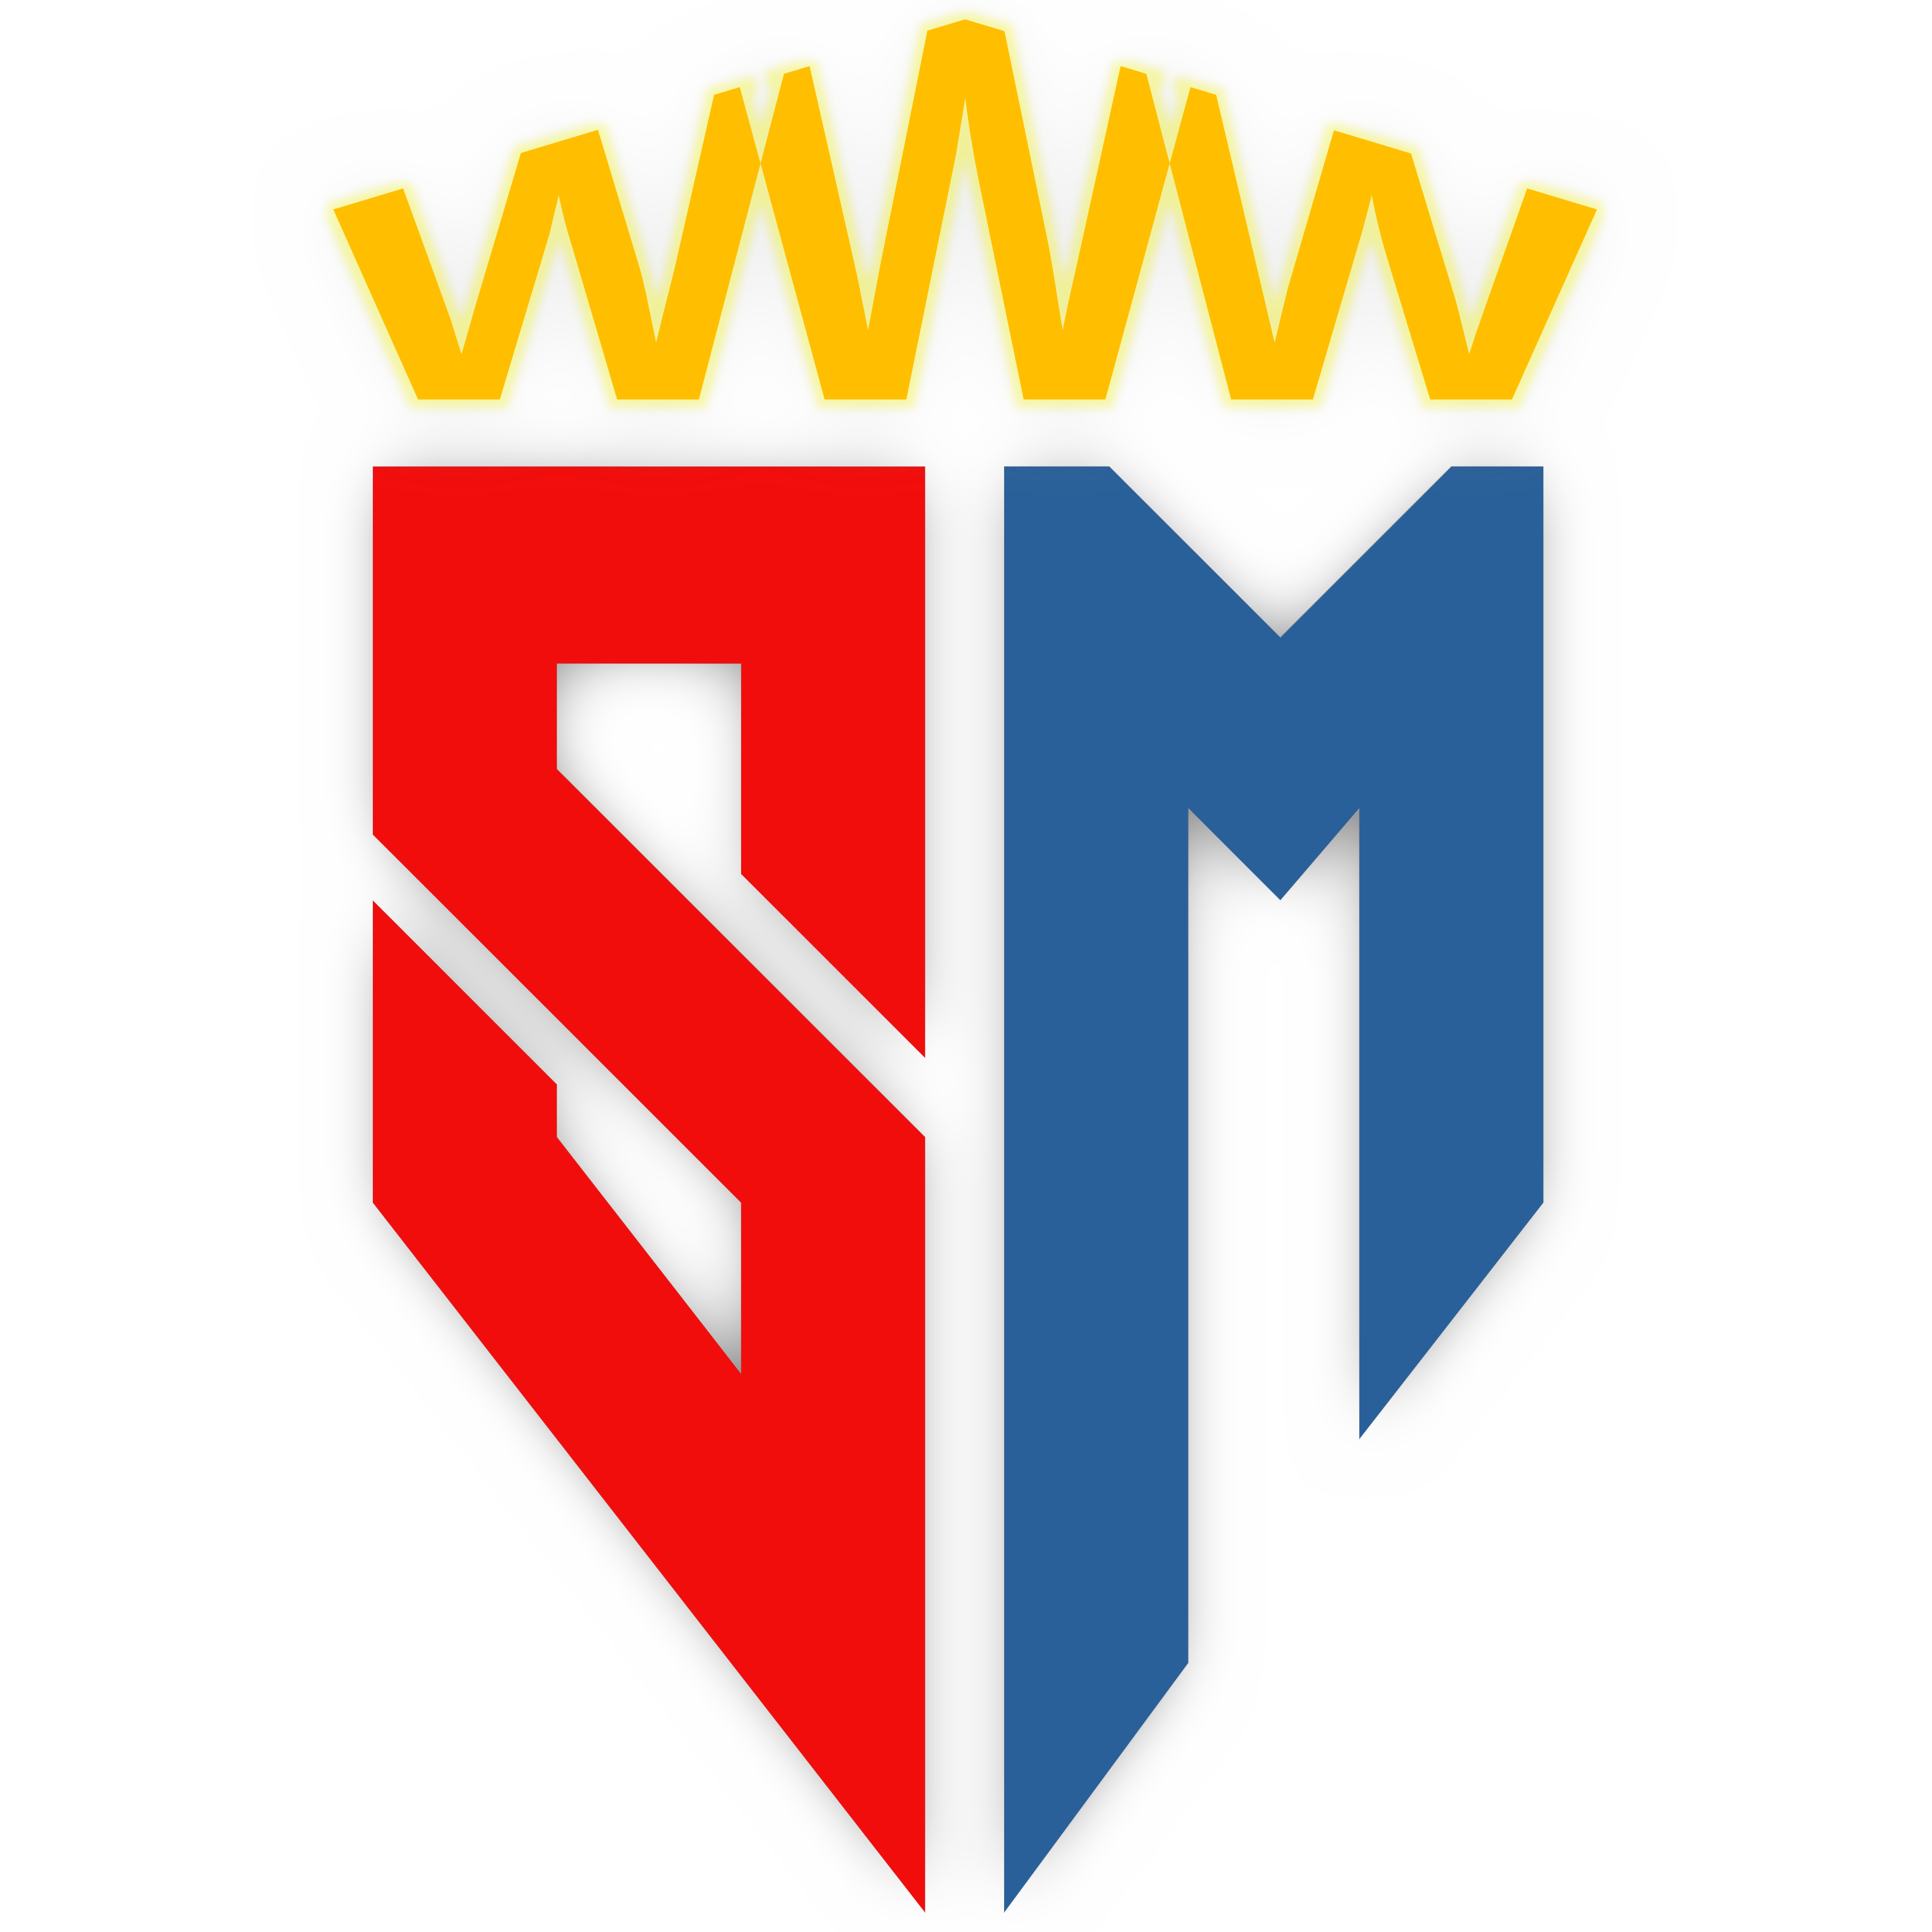 Logo SiteMaker.vip: Red letter S, Blue letter L and yellow WWW on top in the form of a crown.